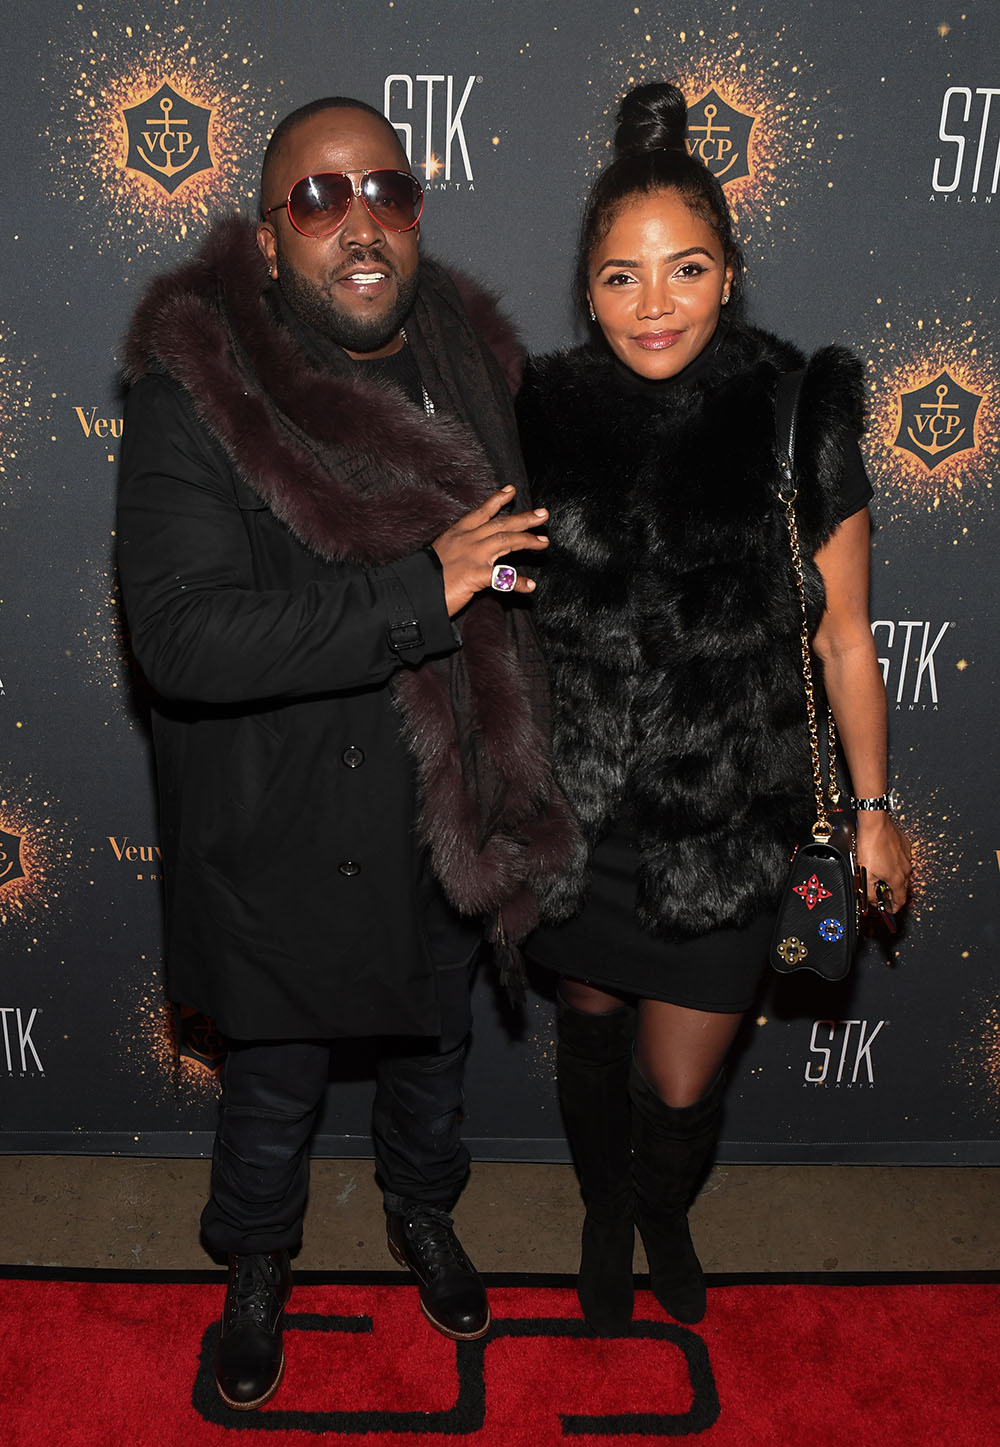 Big Boi & wife Sherlita Patton at Janet Jackson Concert After Party